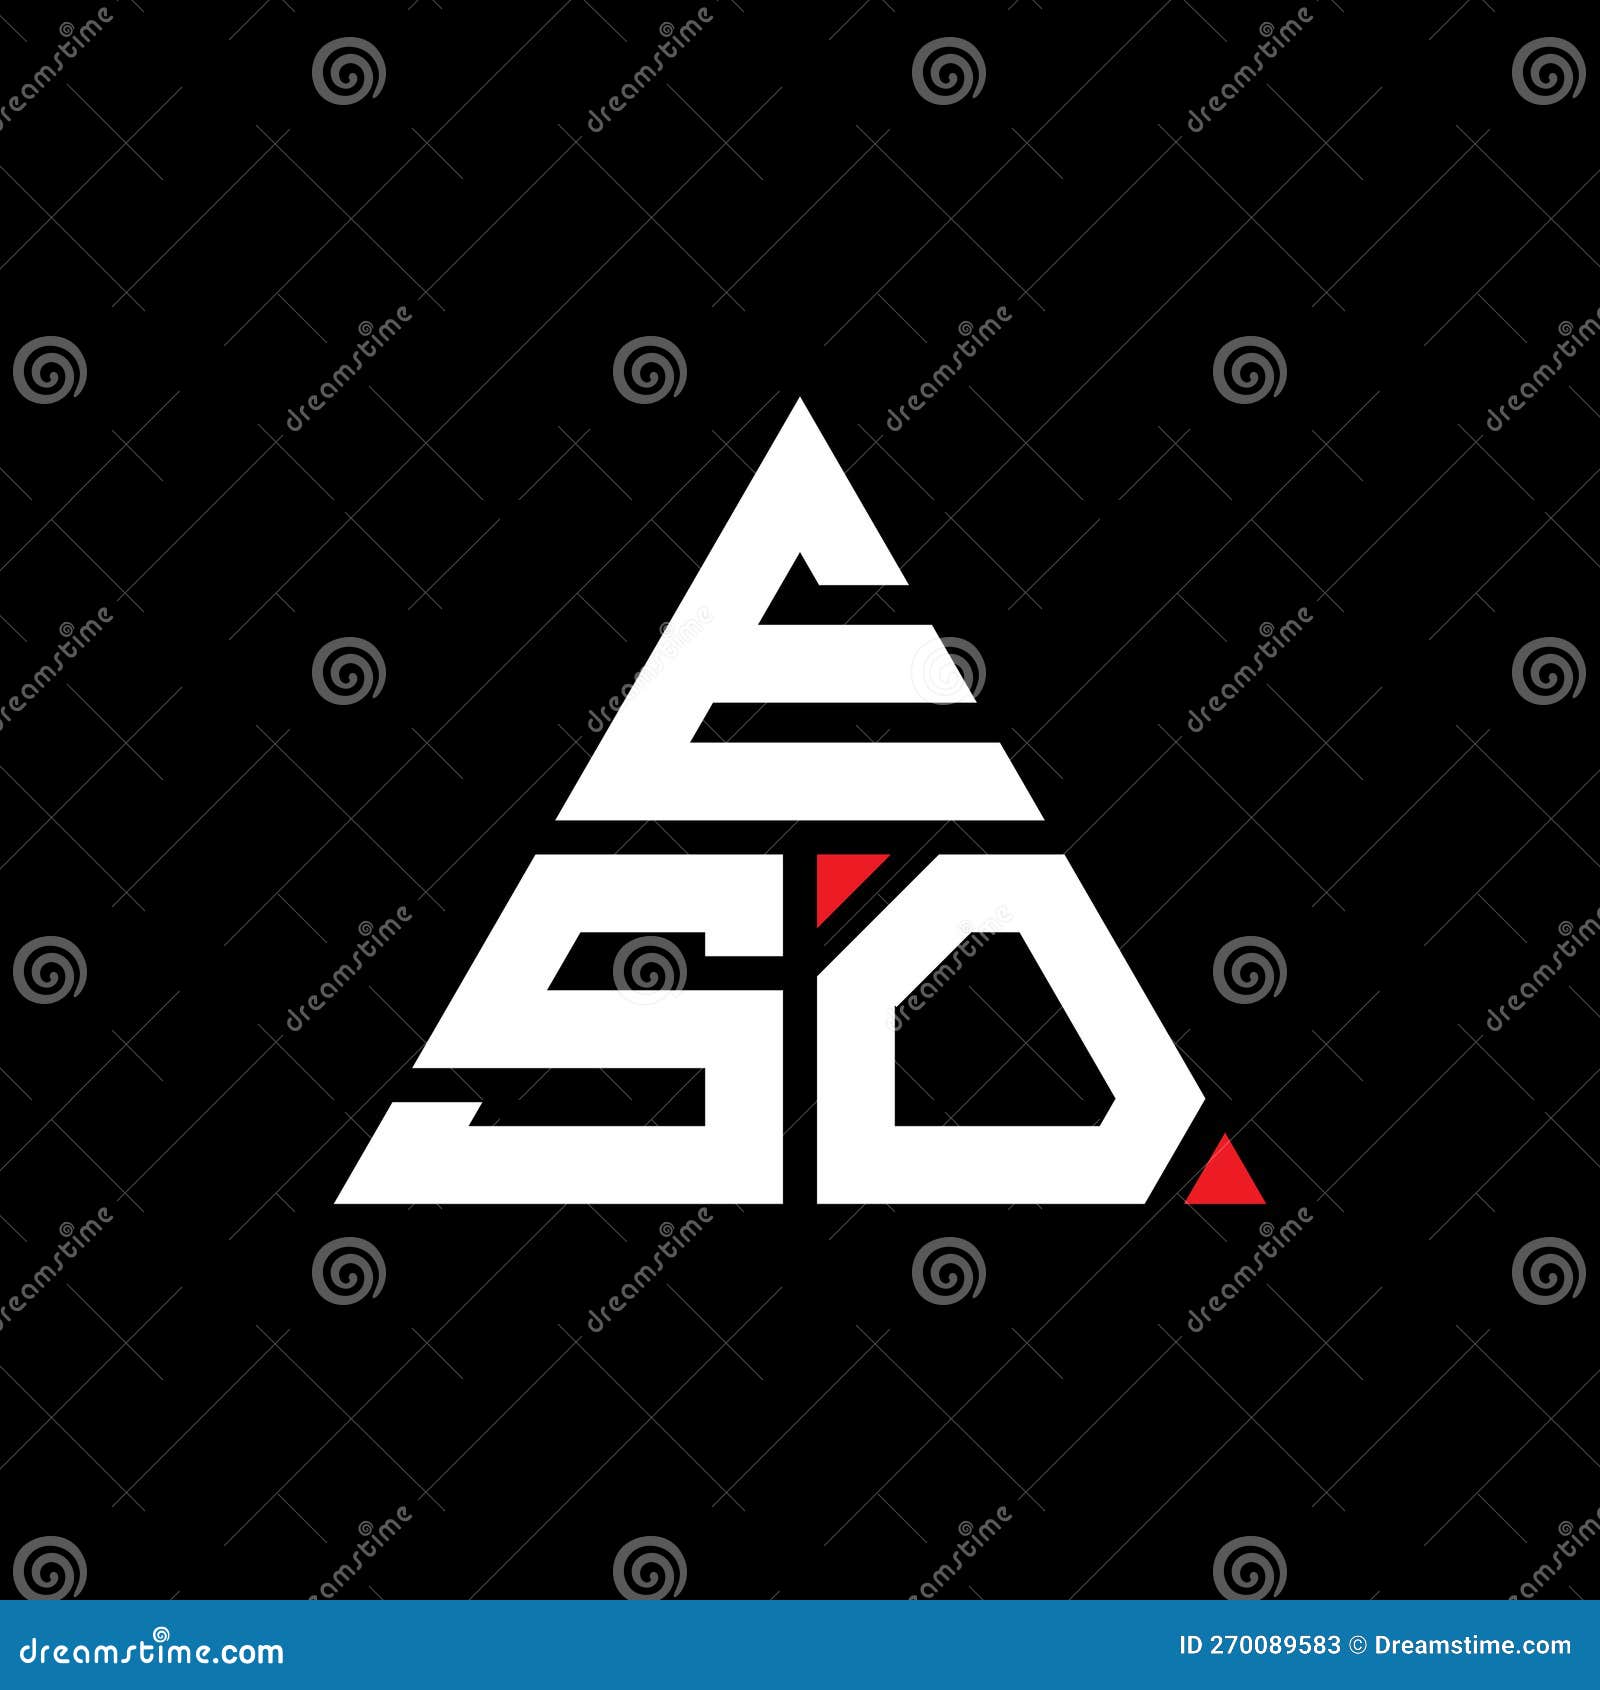 eso triangle letter logo  with triangle . eso triangle logo  monogram. eso triangle  logo template with red